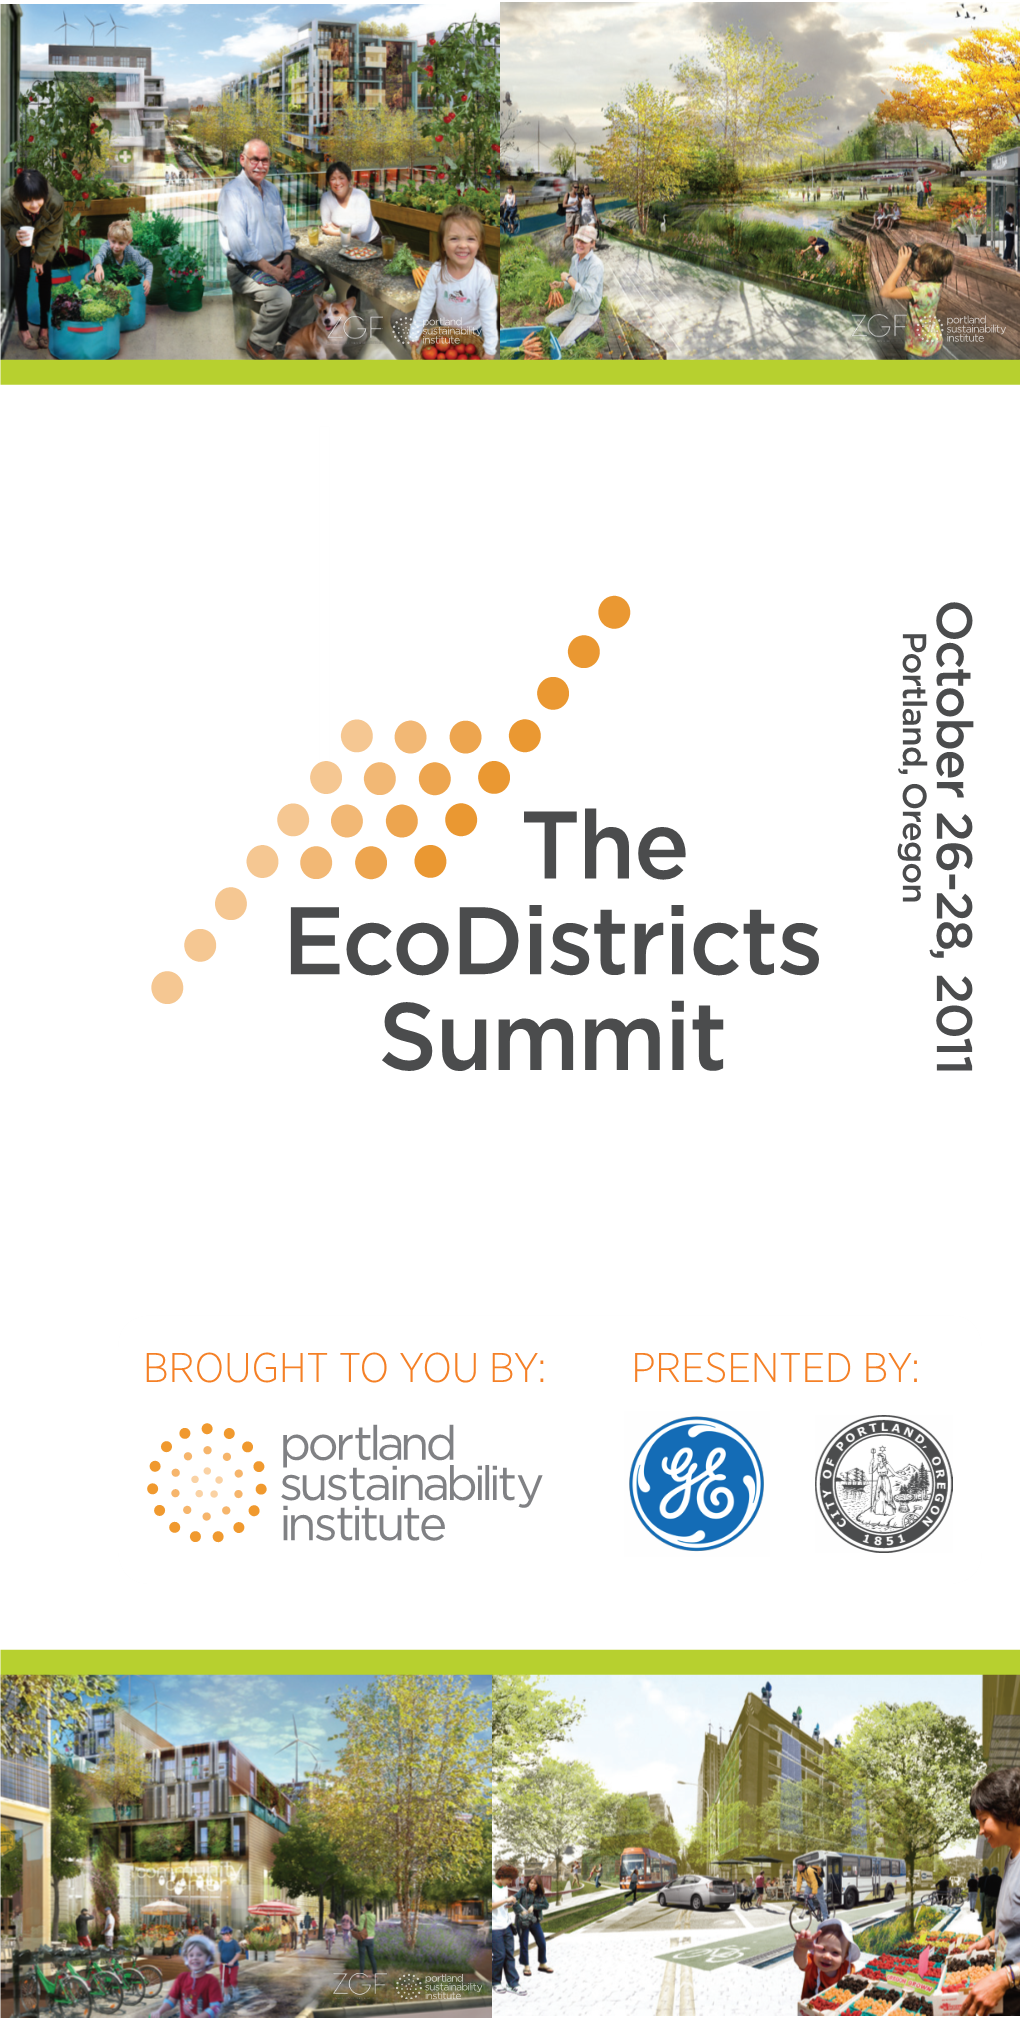 The Ecodistricts Summit Gives Us a Chance to Learn from Our Collective Experience, to Capture the Best Solutions and Best Practices, and to Build from Our Mistakes